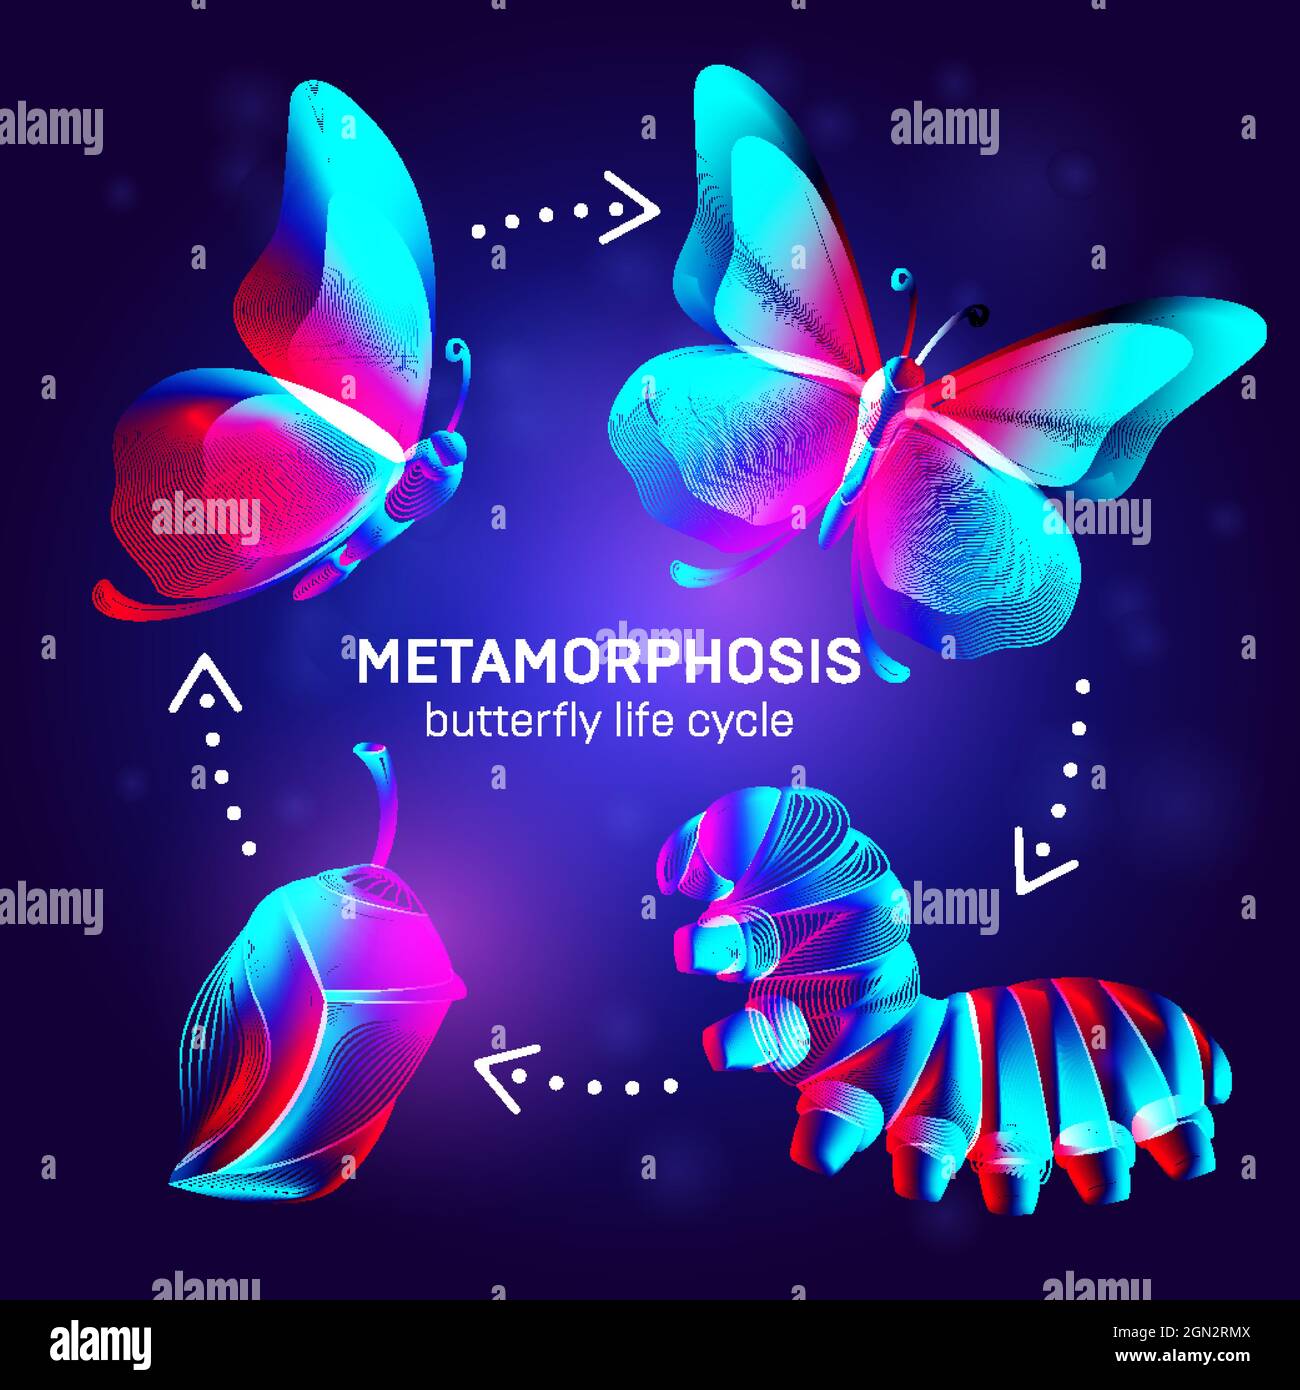 Metamorphosis concept. Butterfly life cycle banner. 3D vector illustration with abstract stereo neon silhouettes of insects - caterpillar, chrysalis a Stock Vector